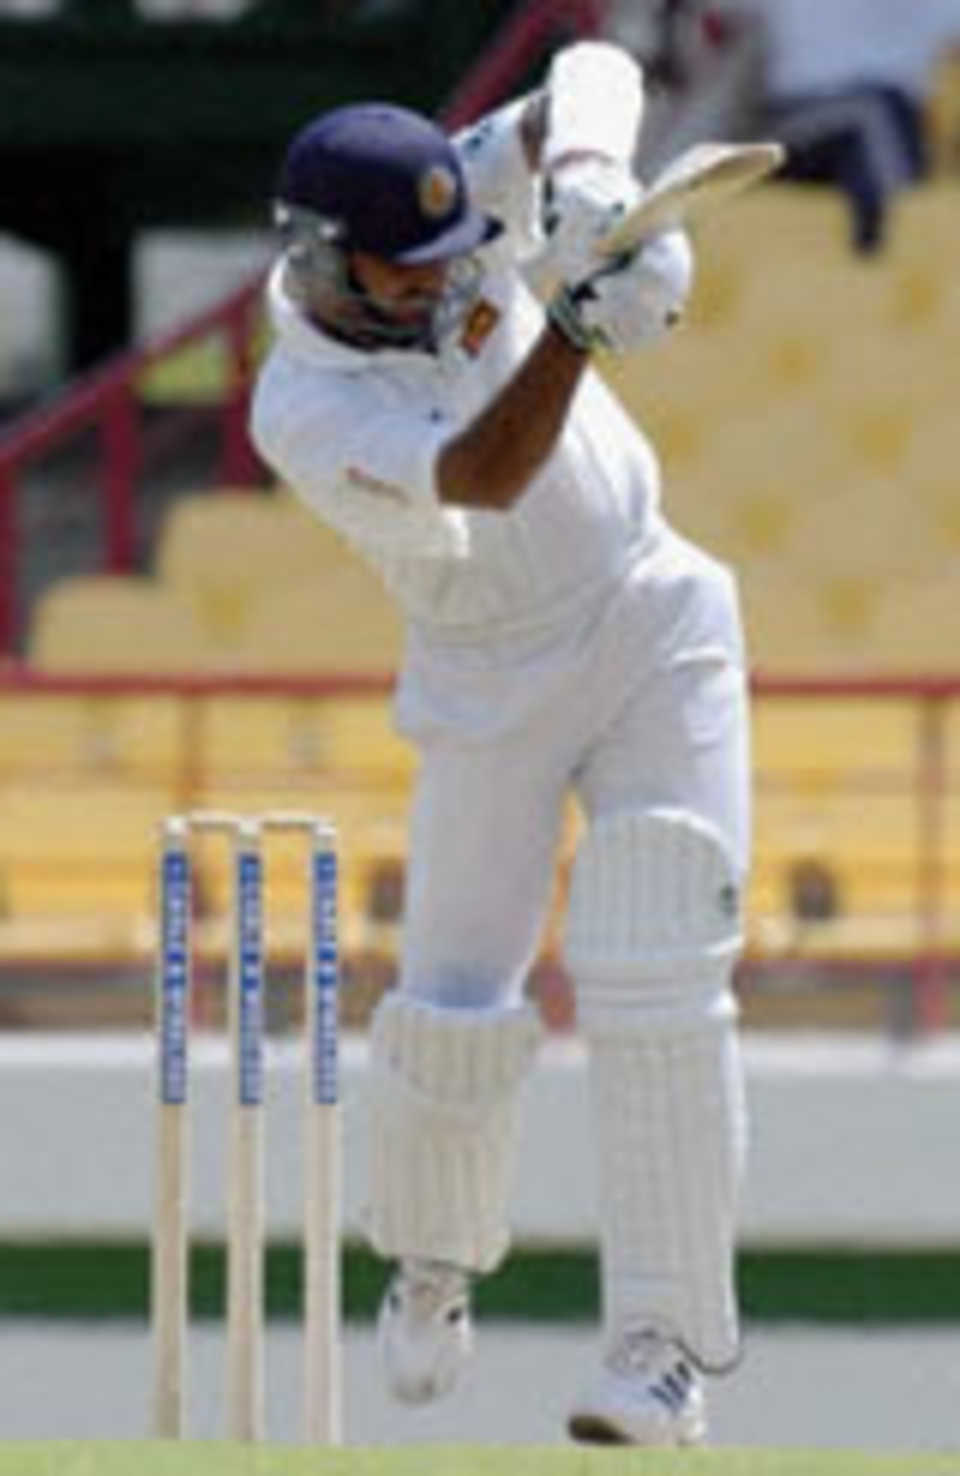 Marvan Atapattu driving West Indies bowler Corey Collymore during the first test match v West Indies at Beausejour Stadium, St. Lucia